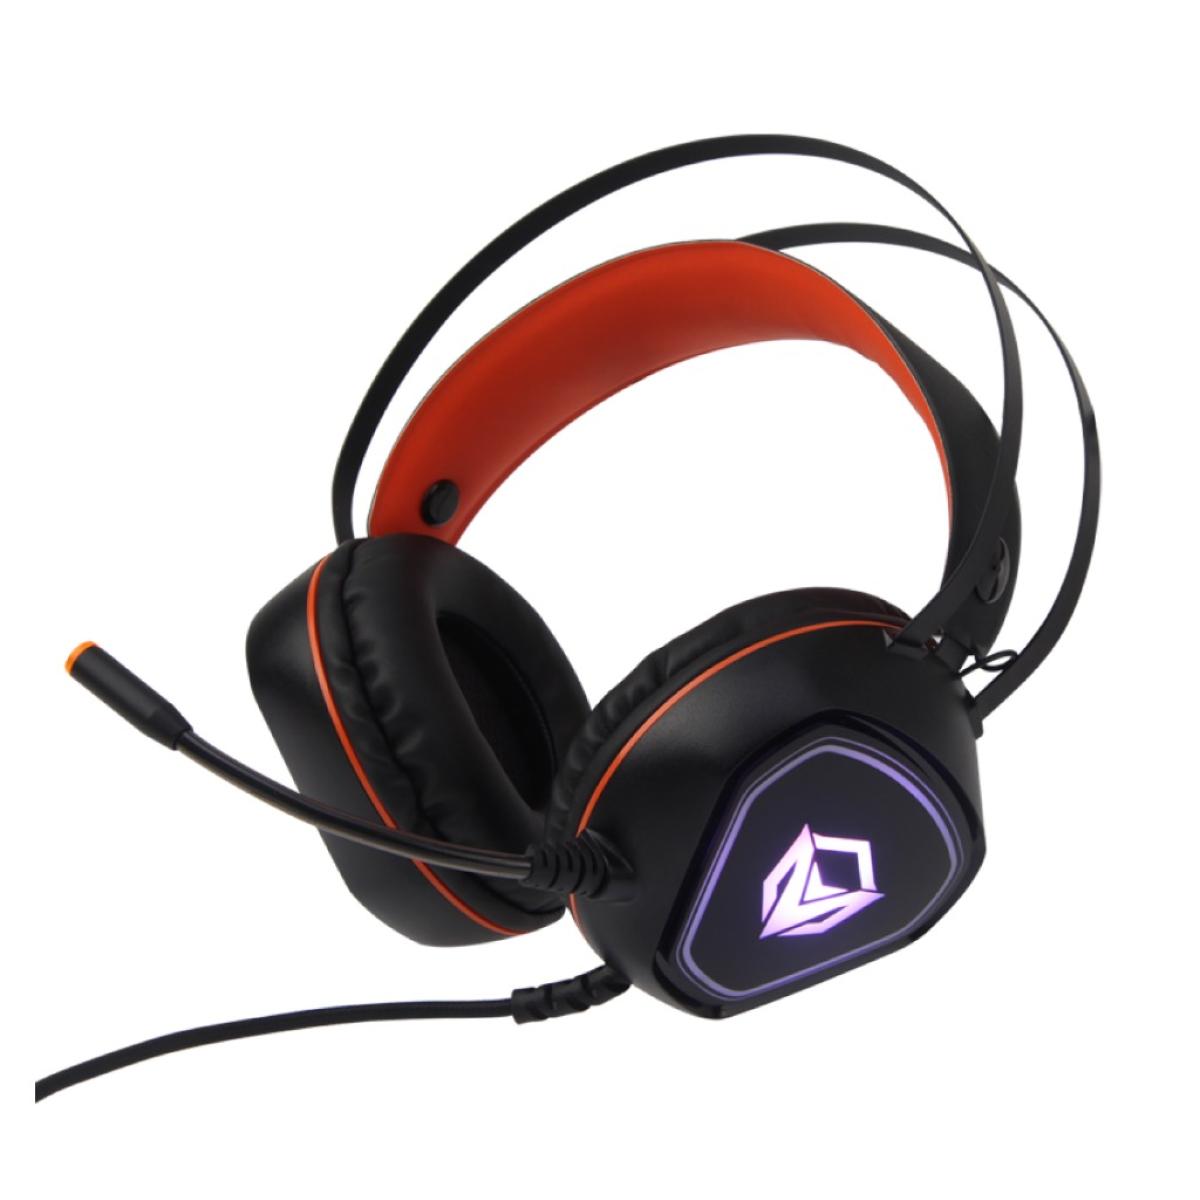 MeeTion Backlit Gaming Headset with Mic